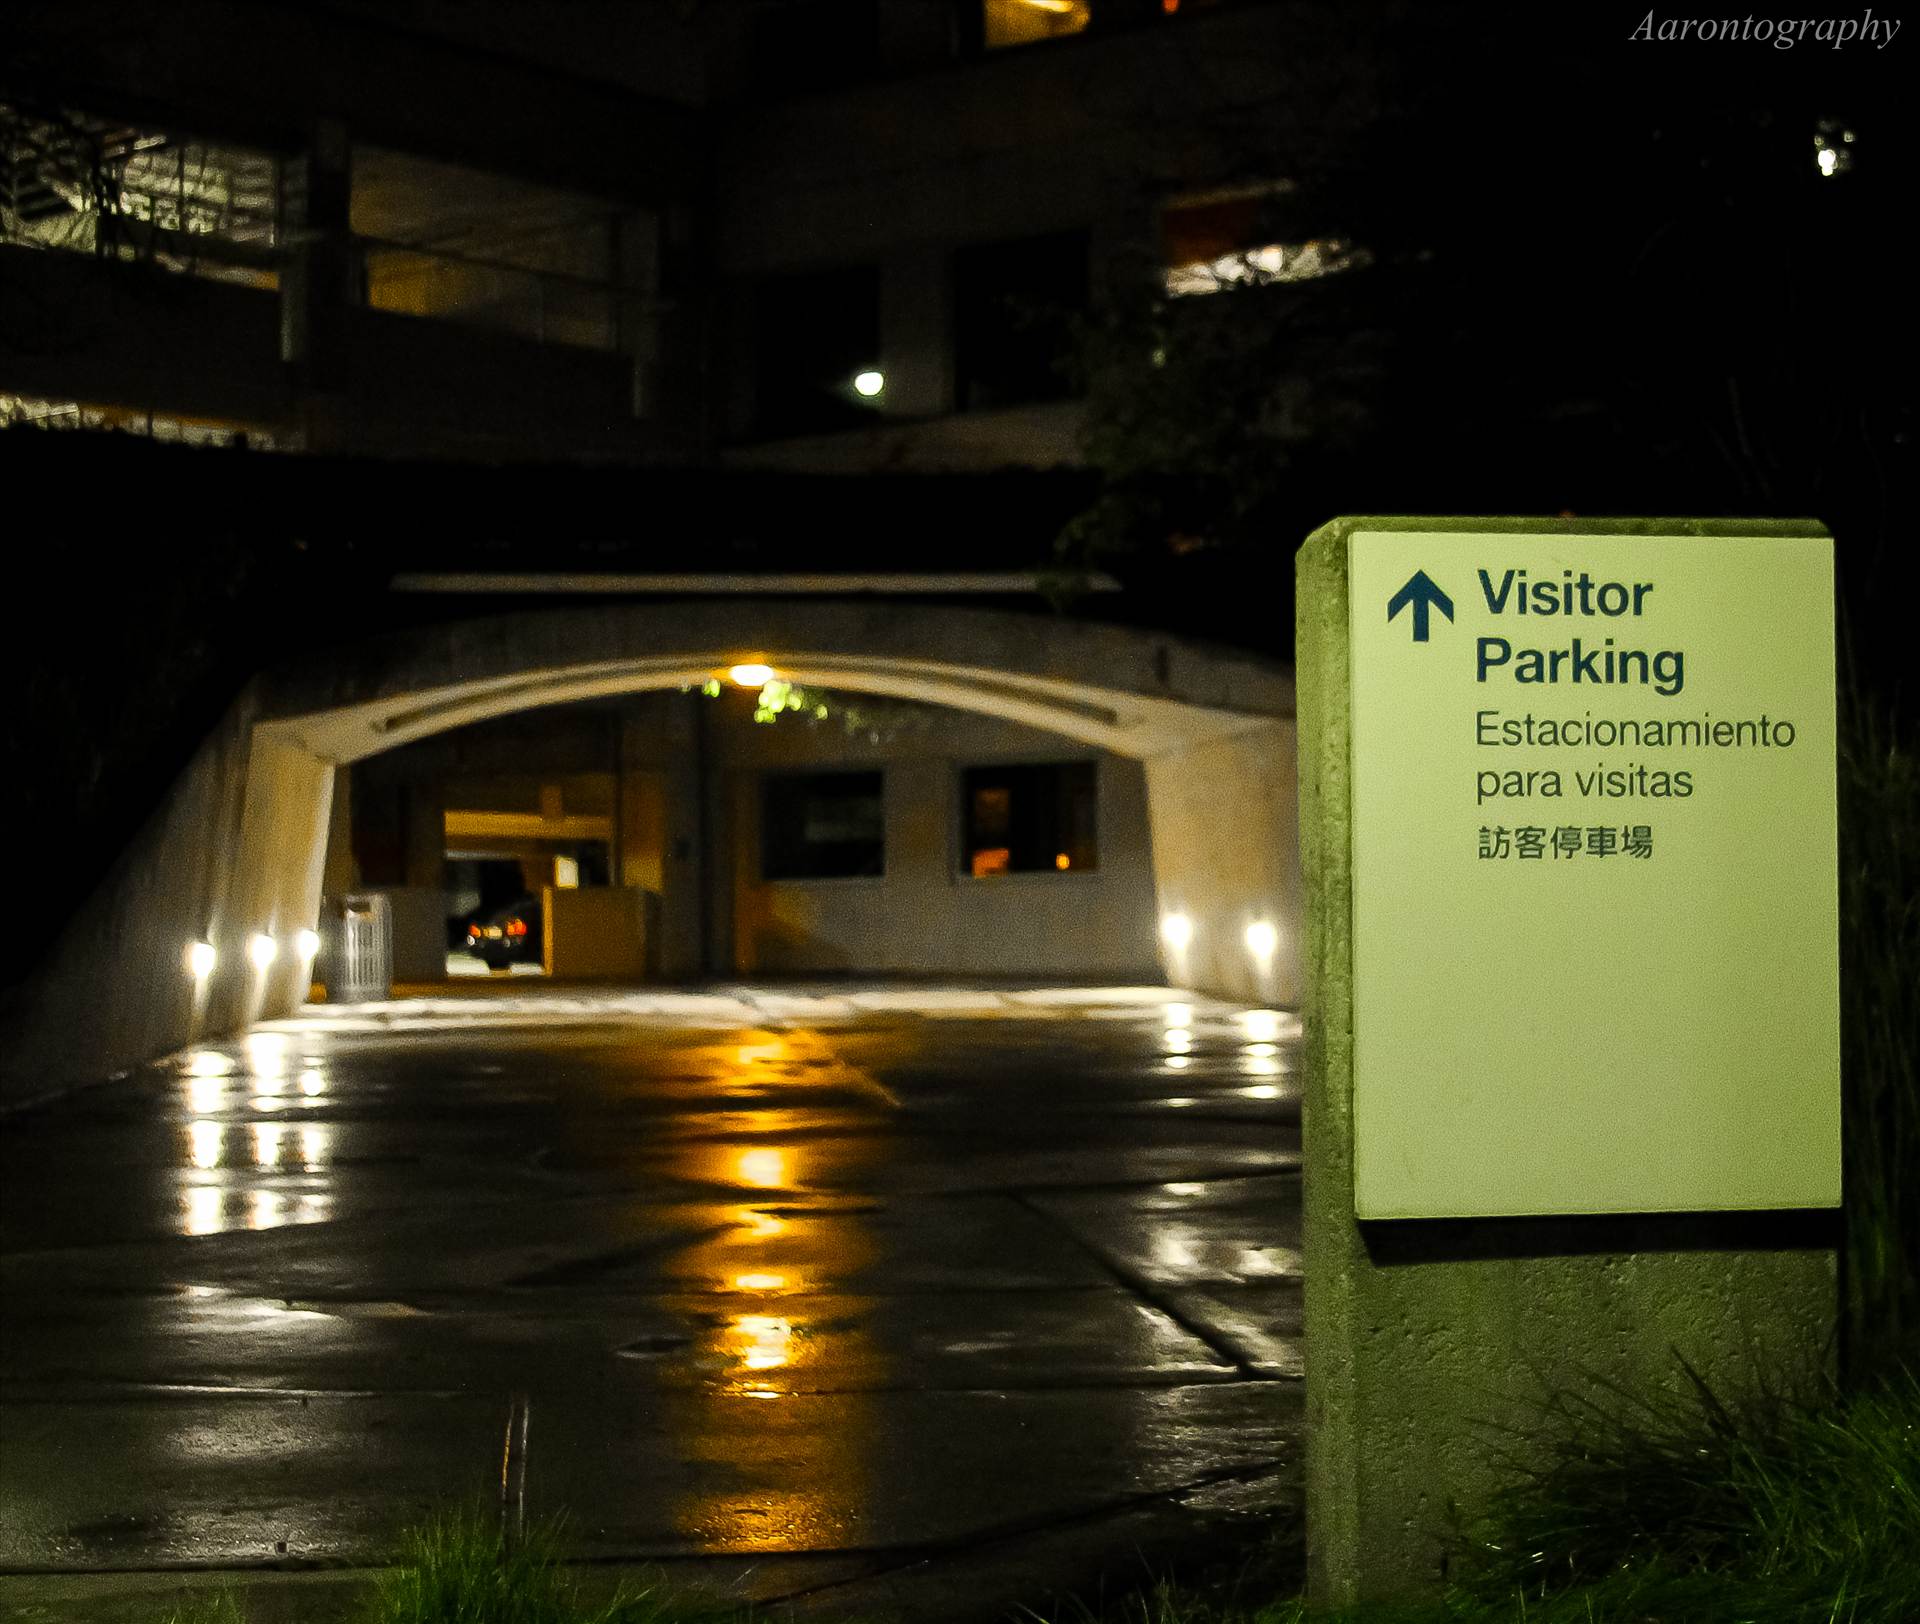 Visitor Parking (1 of 1).jpg undefined by Aaron